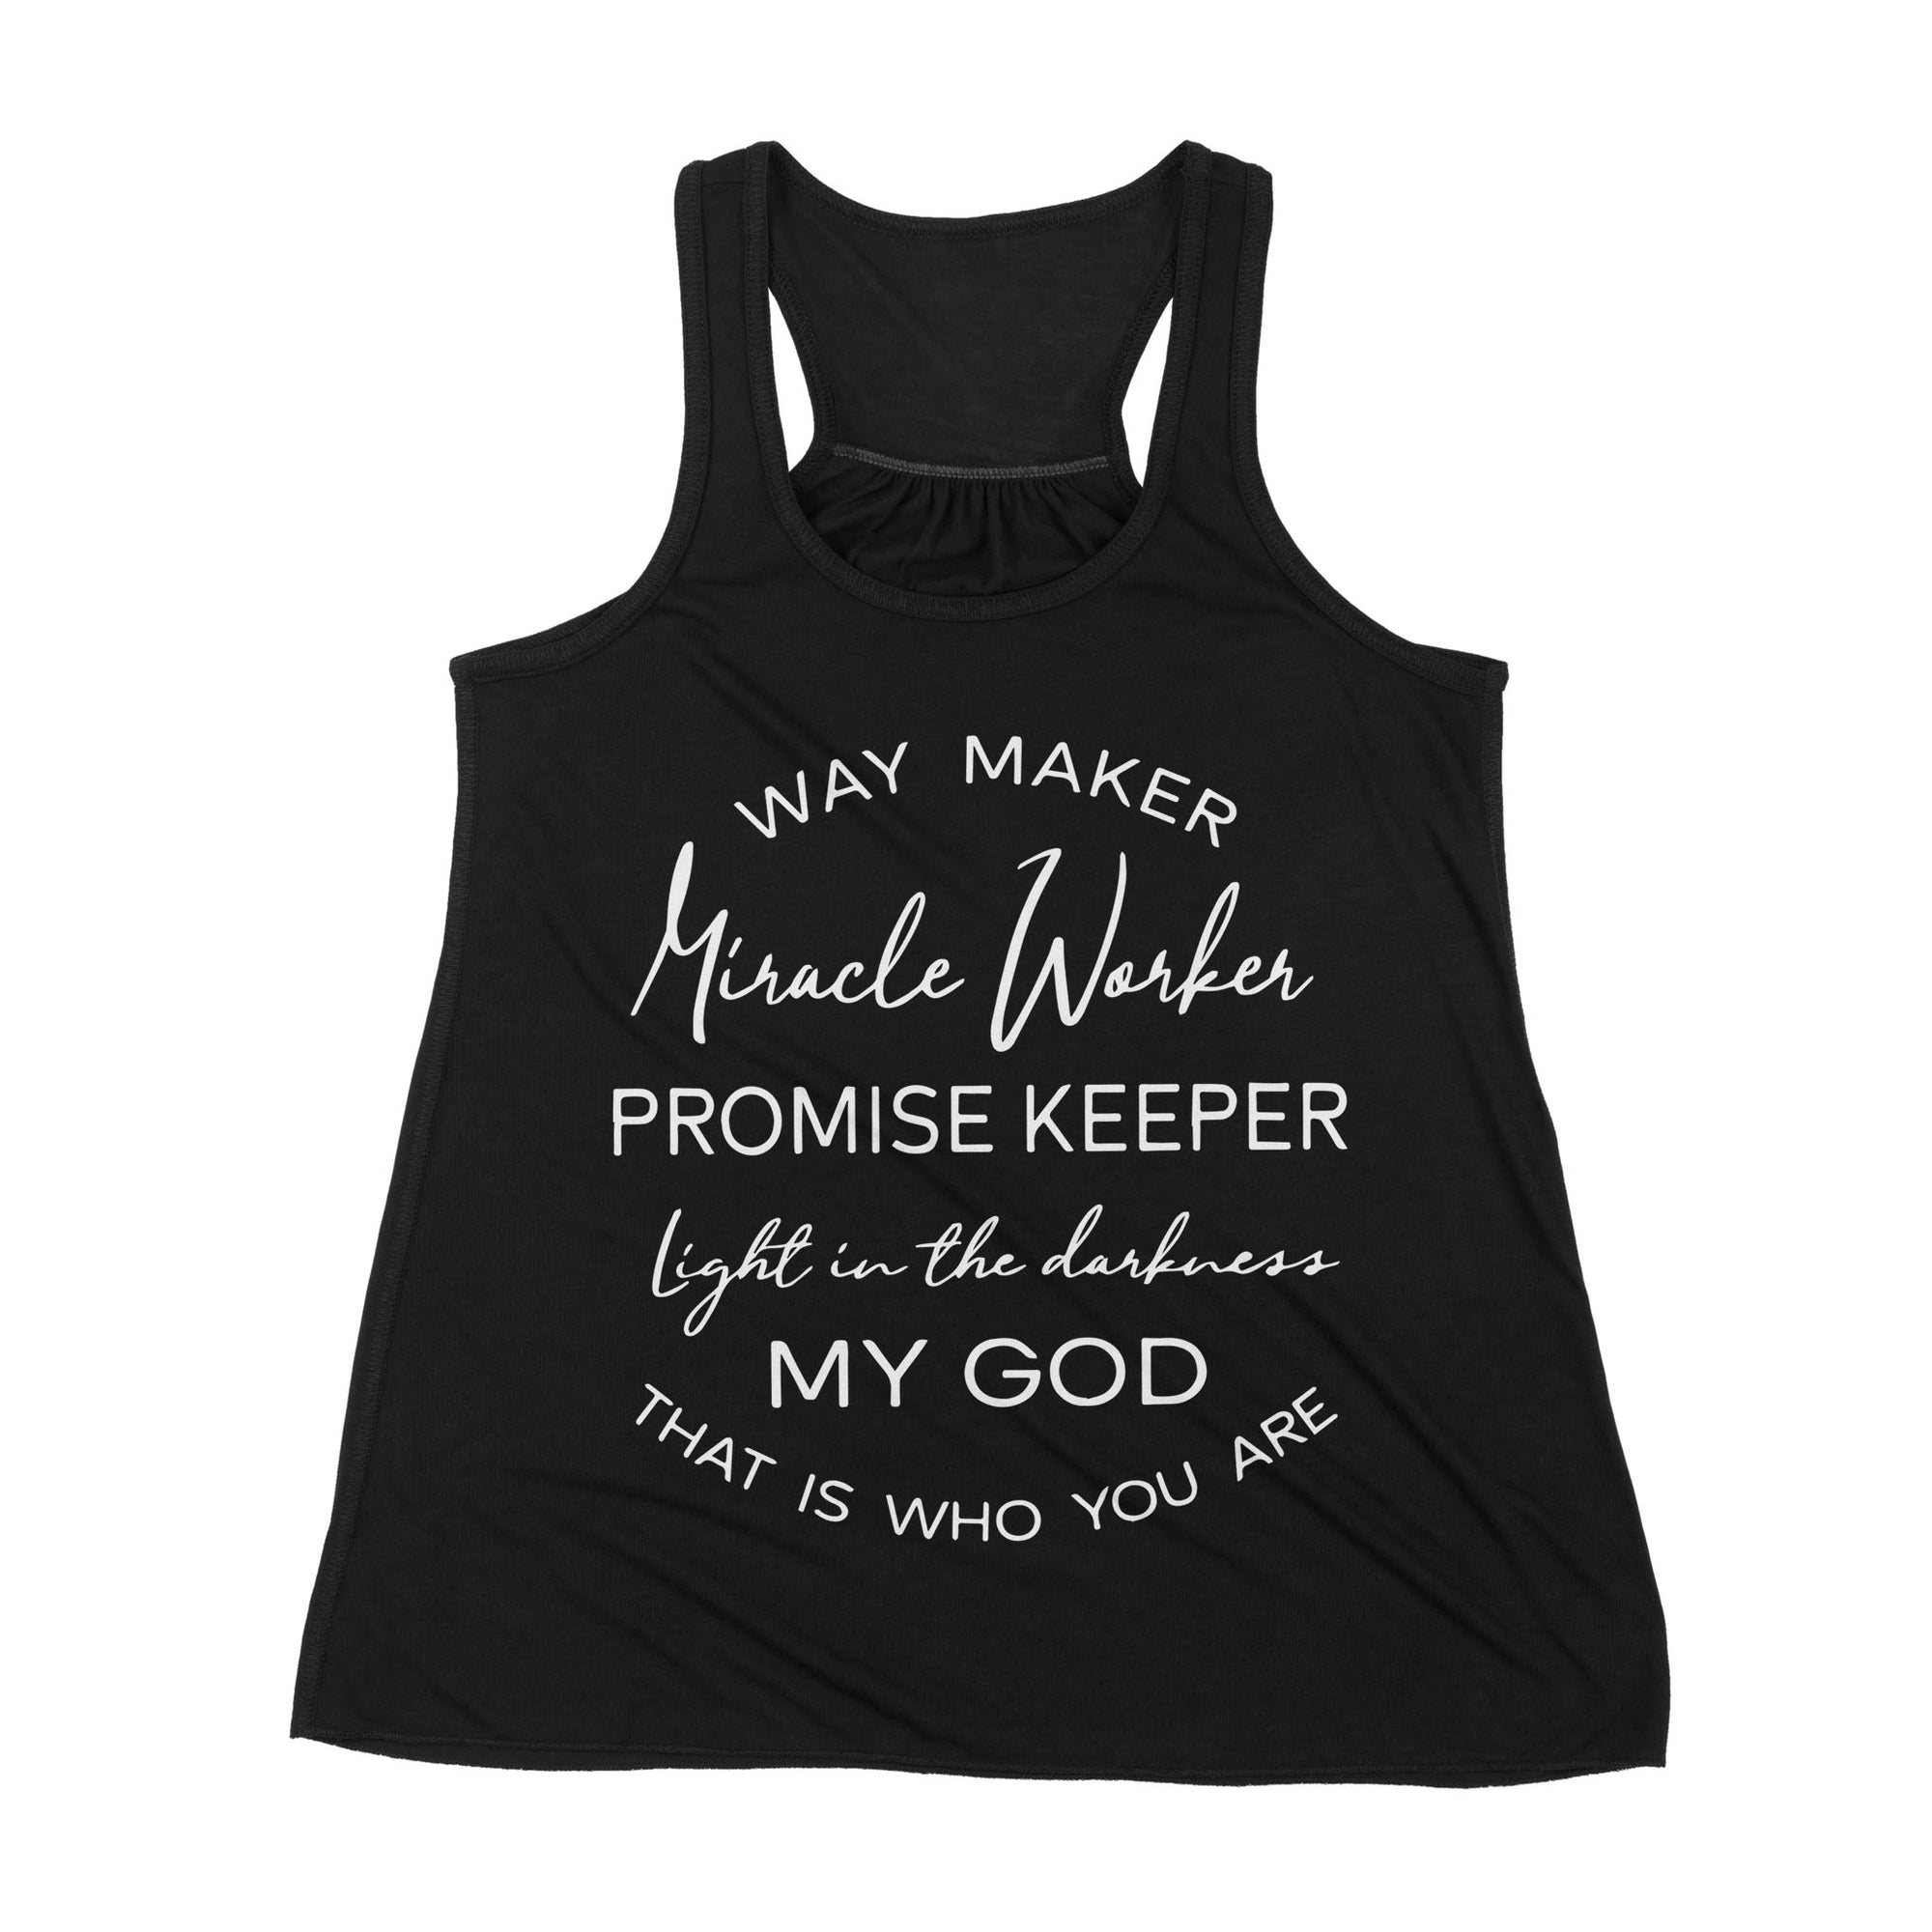 Way Maker Miracle Worker Promise Keeper Light In The Darkness My God That Is Who You Are - Premium Women's Tank